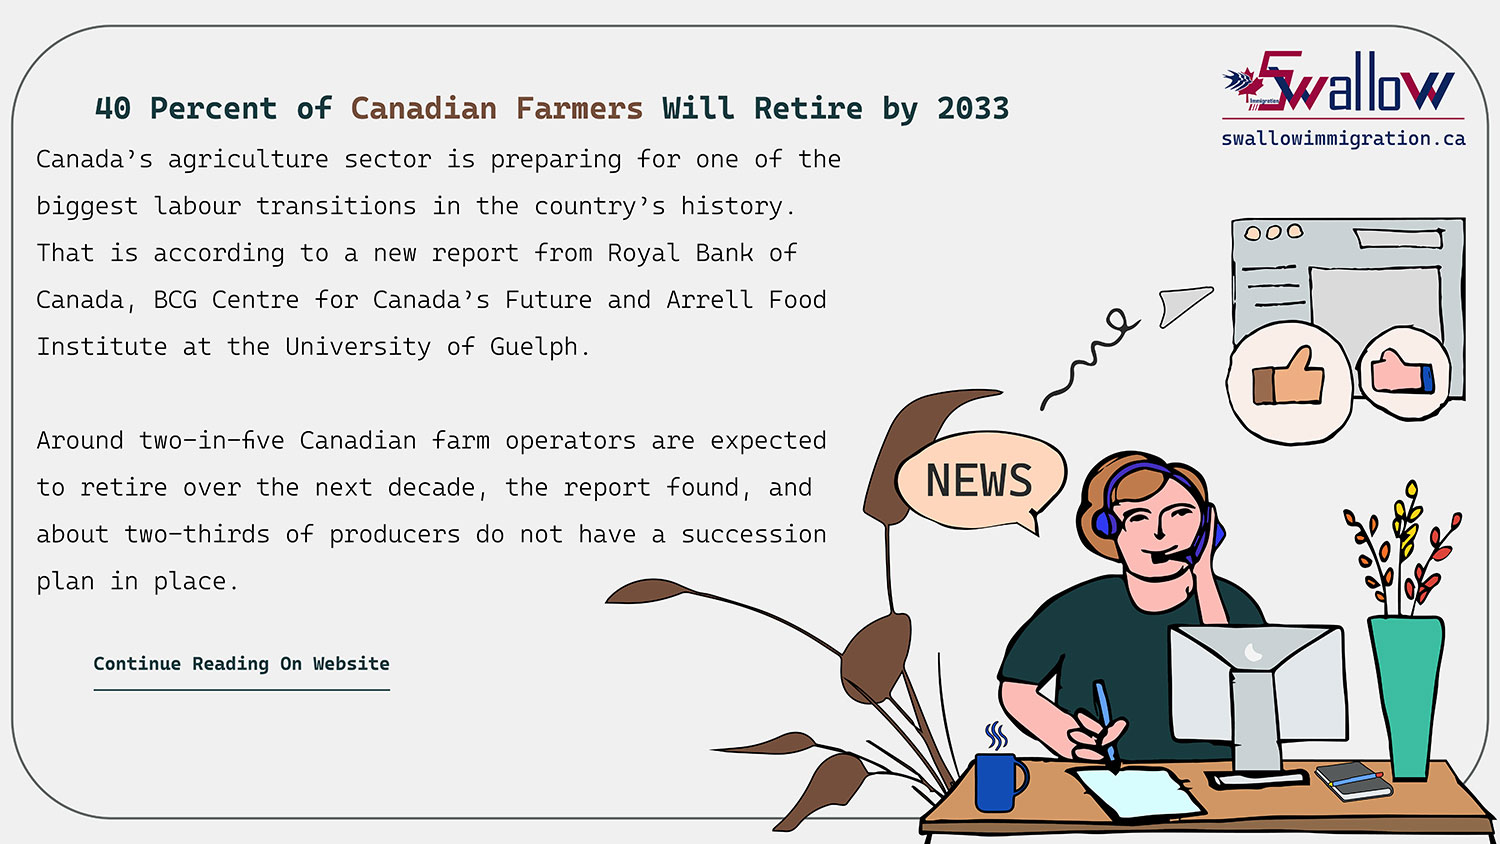 40 Percent of Canadian Farmers Will Retire by 2033